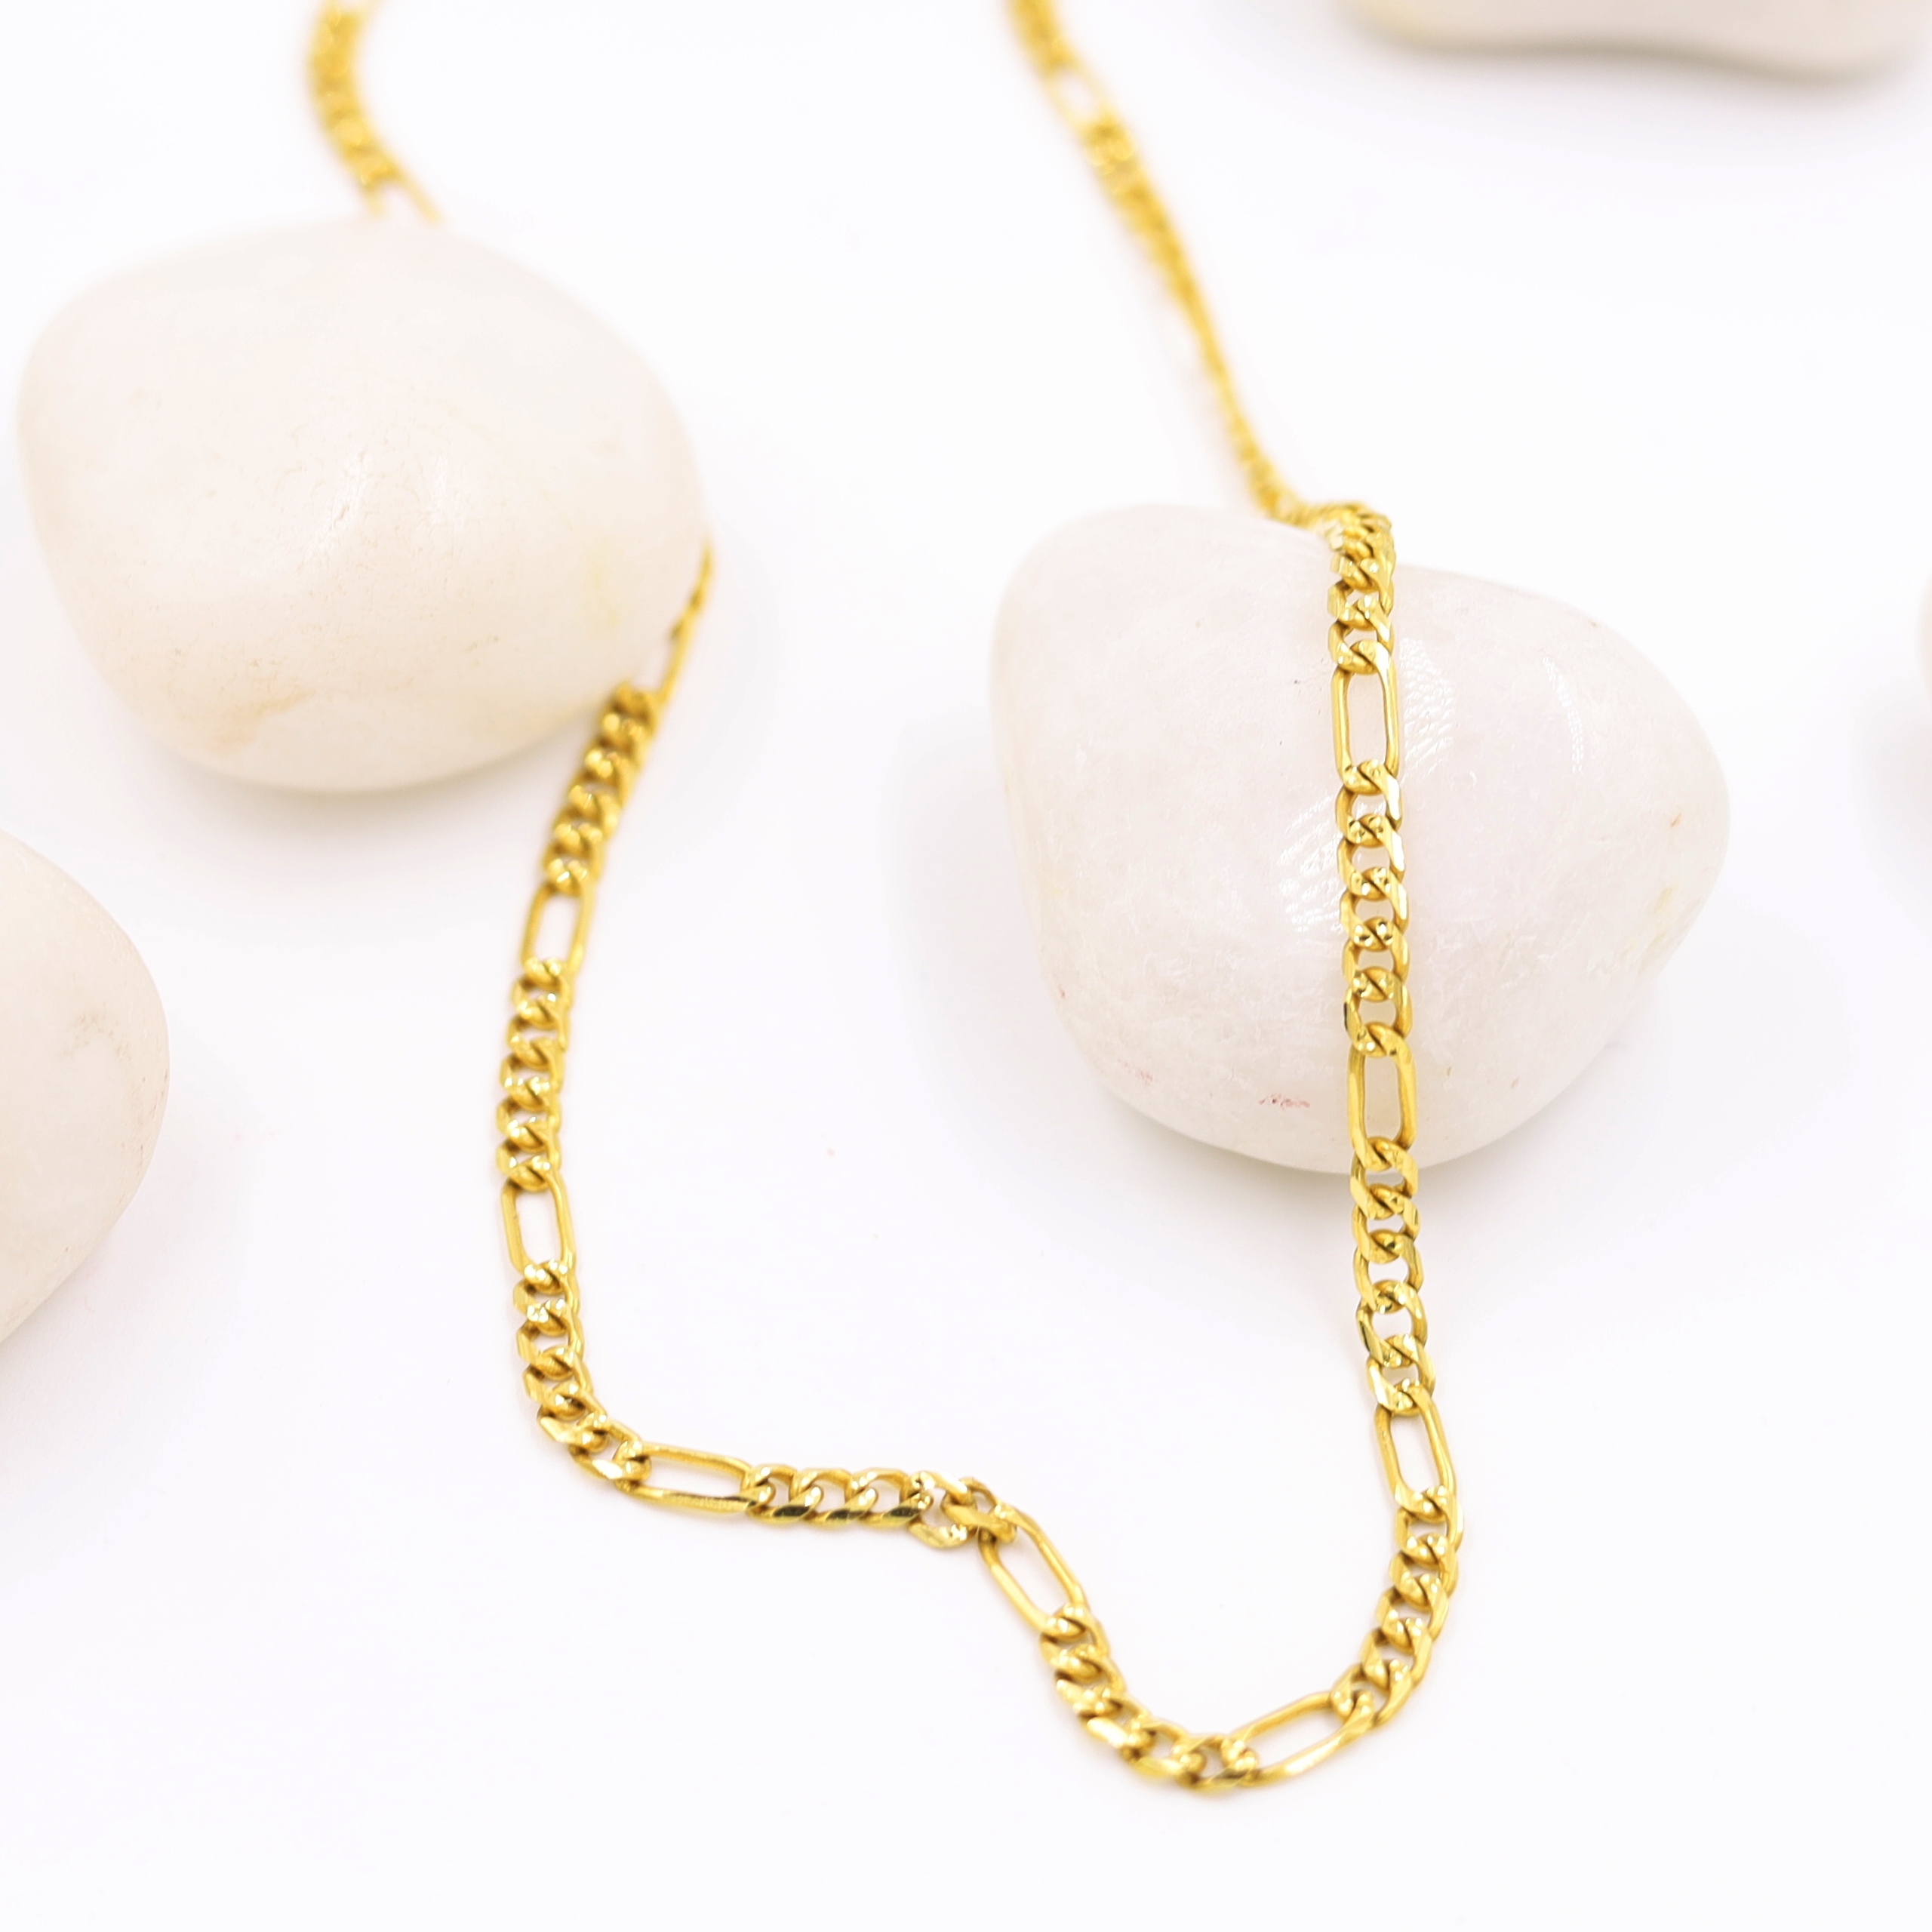 Minimal Gold Chain With Links For Men